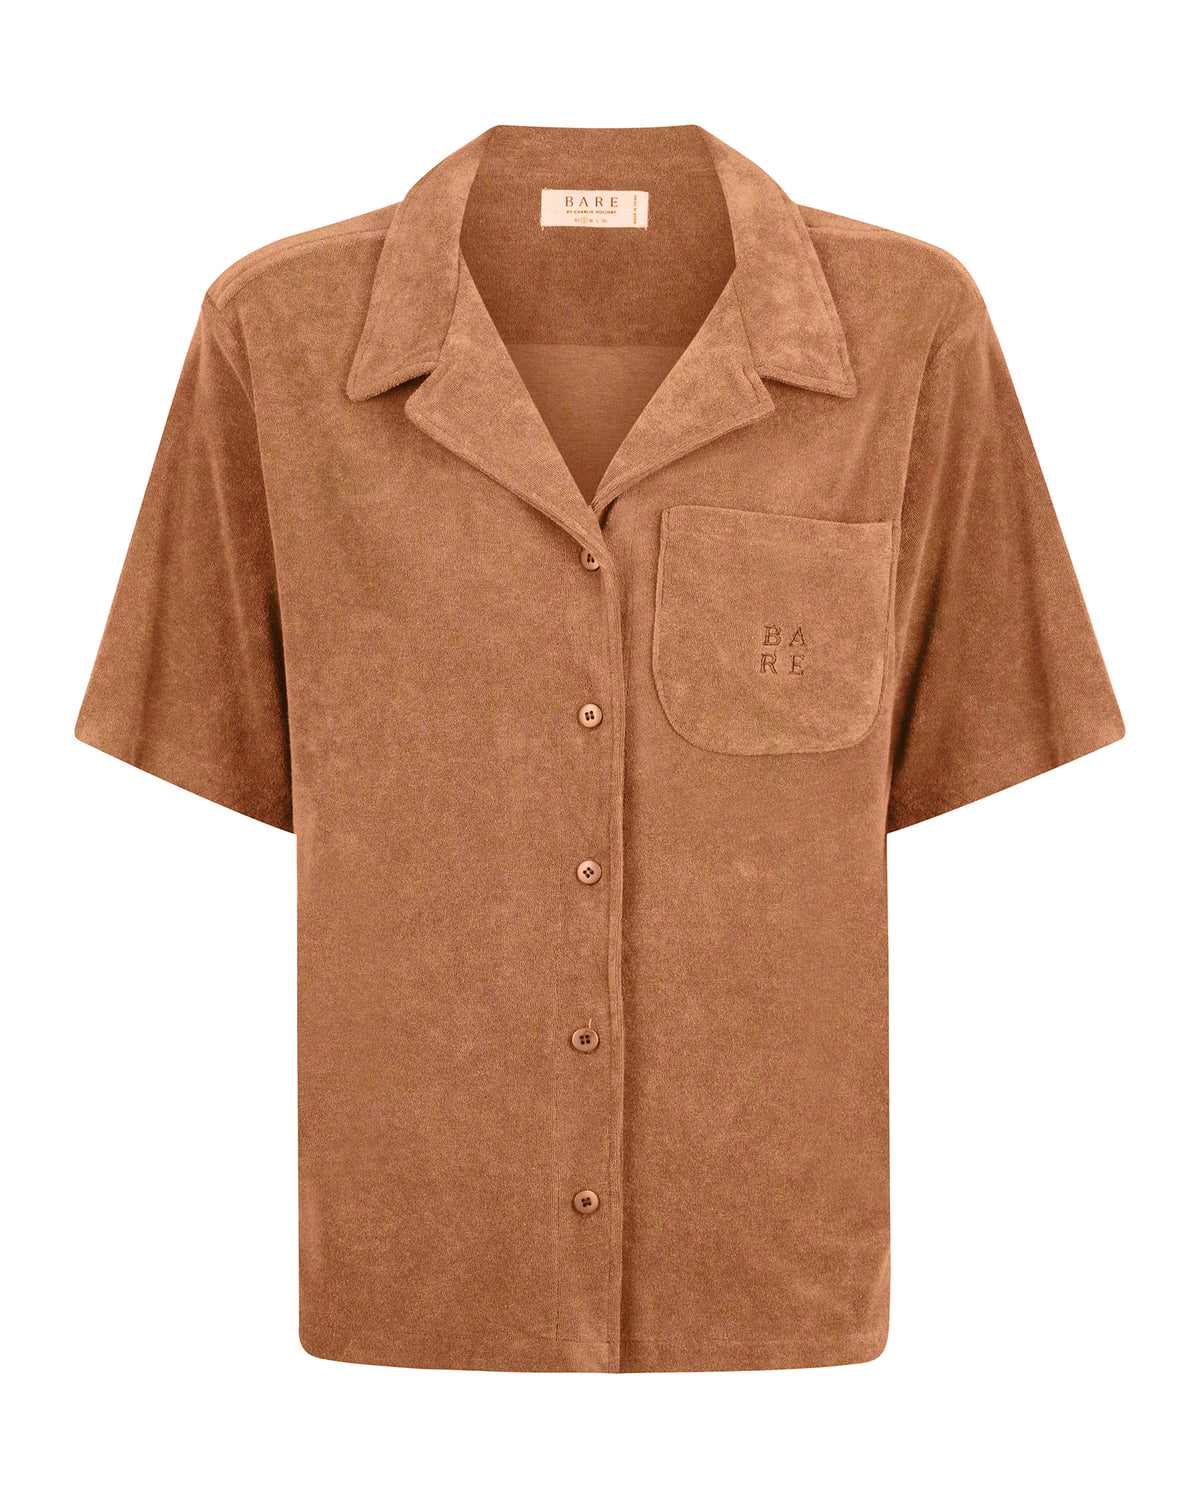 The Terry Towelling Shirt